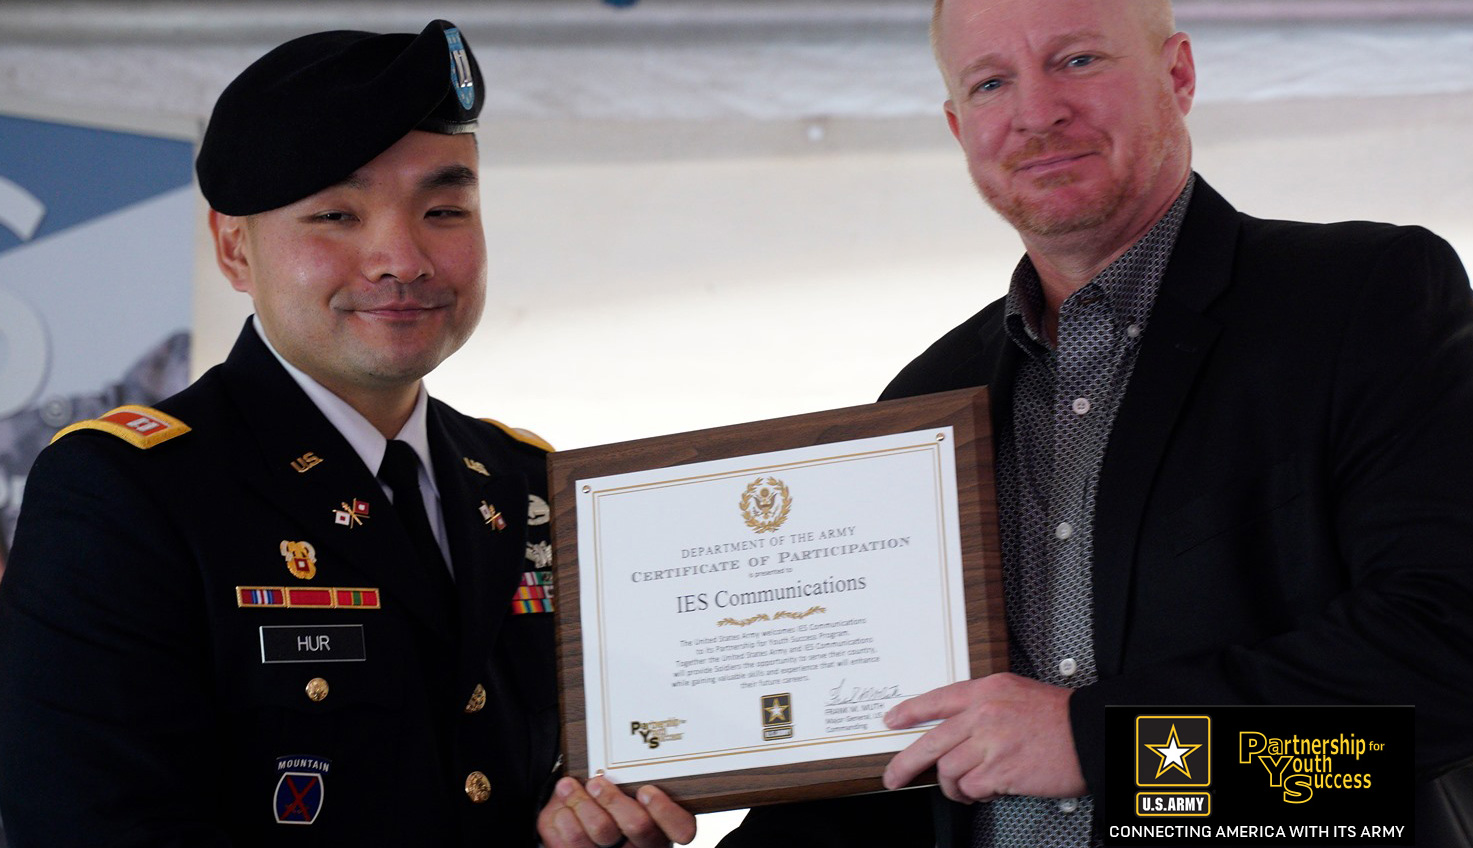 IES Communications executive receives a certificate from a US Army official for participation in the US Army Partnership for Youth Success program